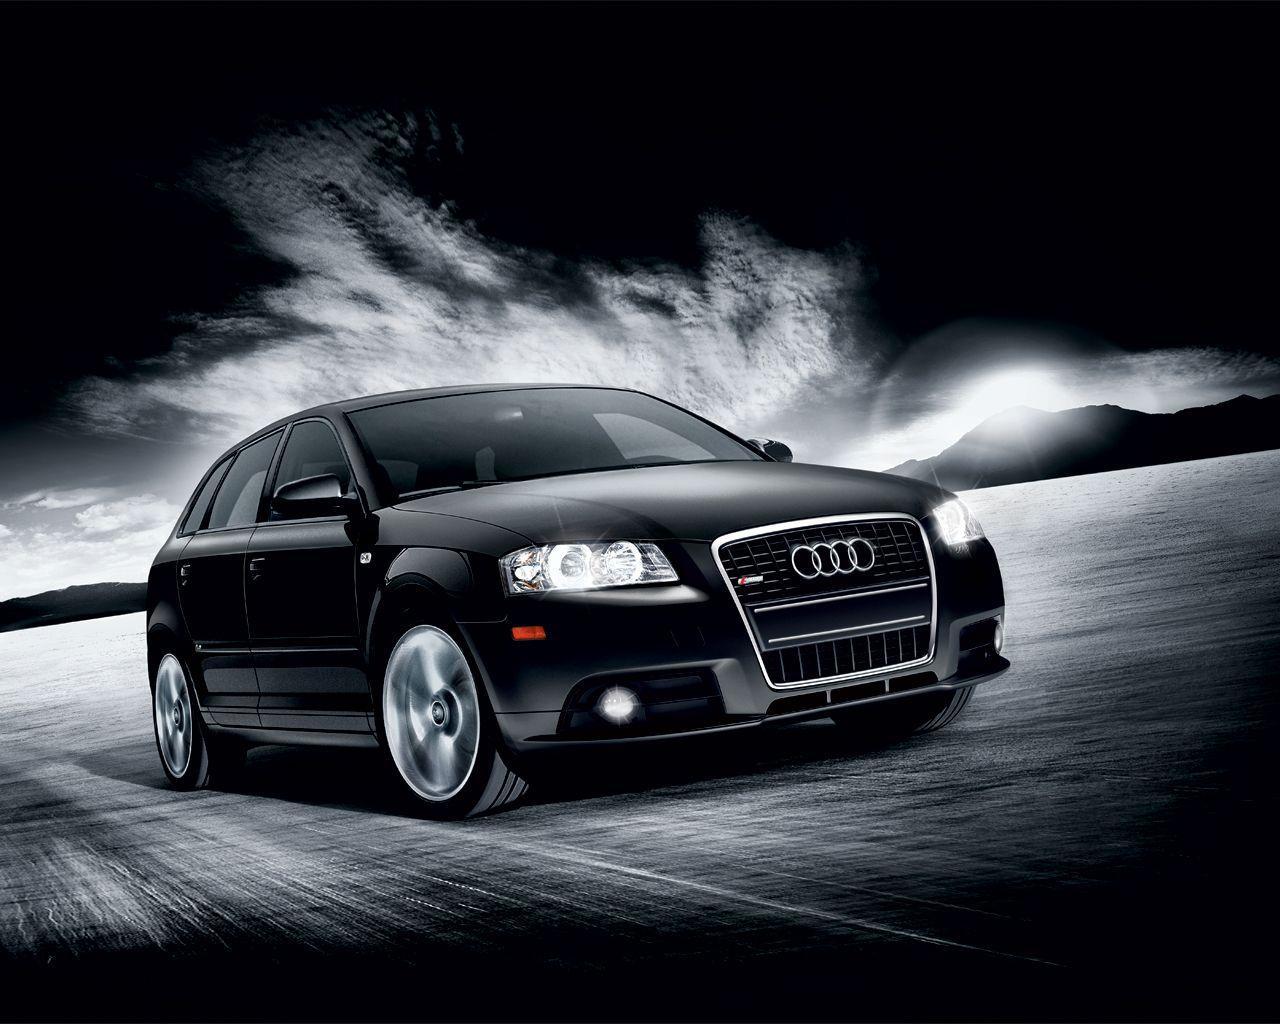 Audi A3 Hd Wallpapers For Laptop